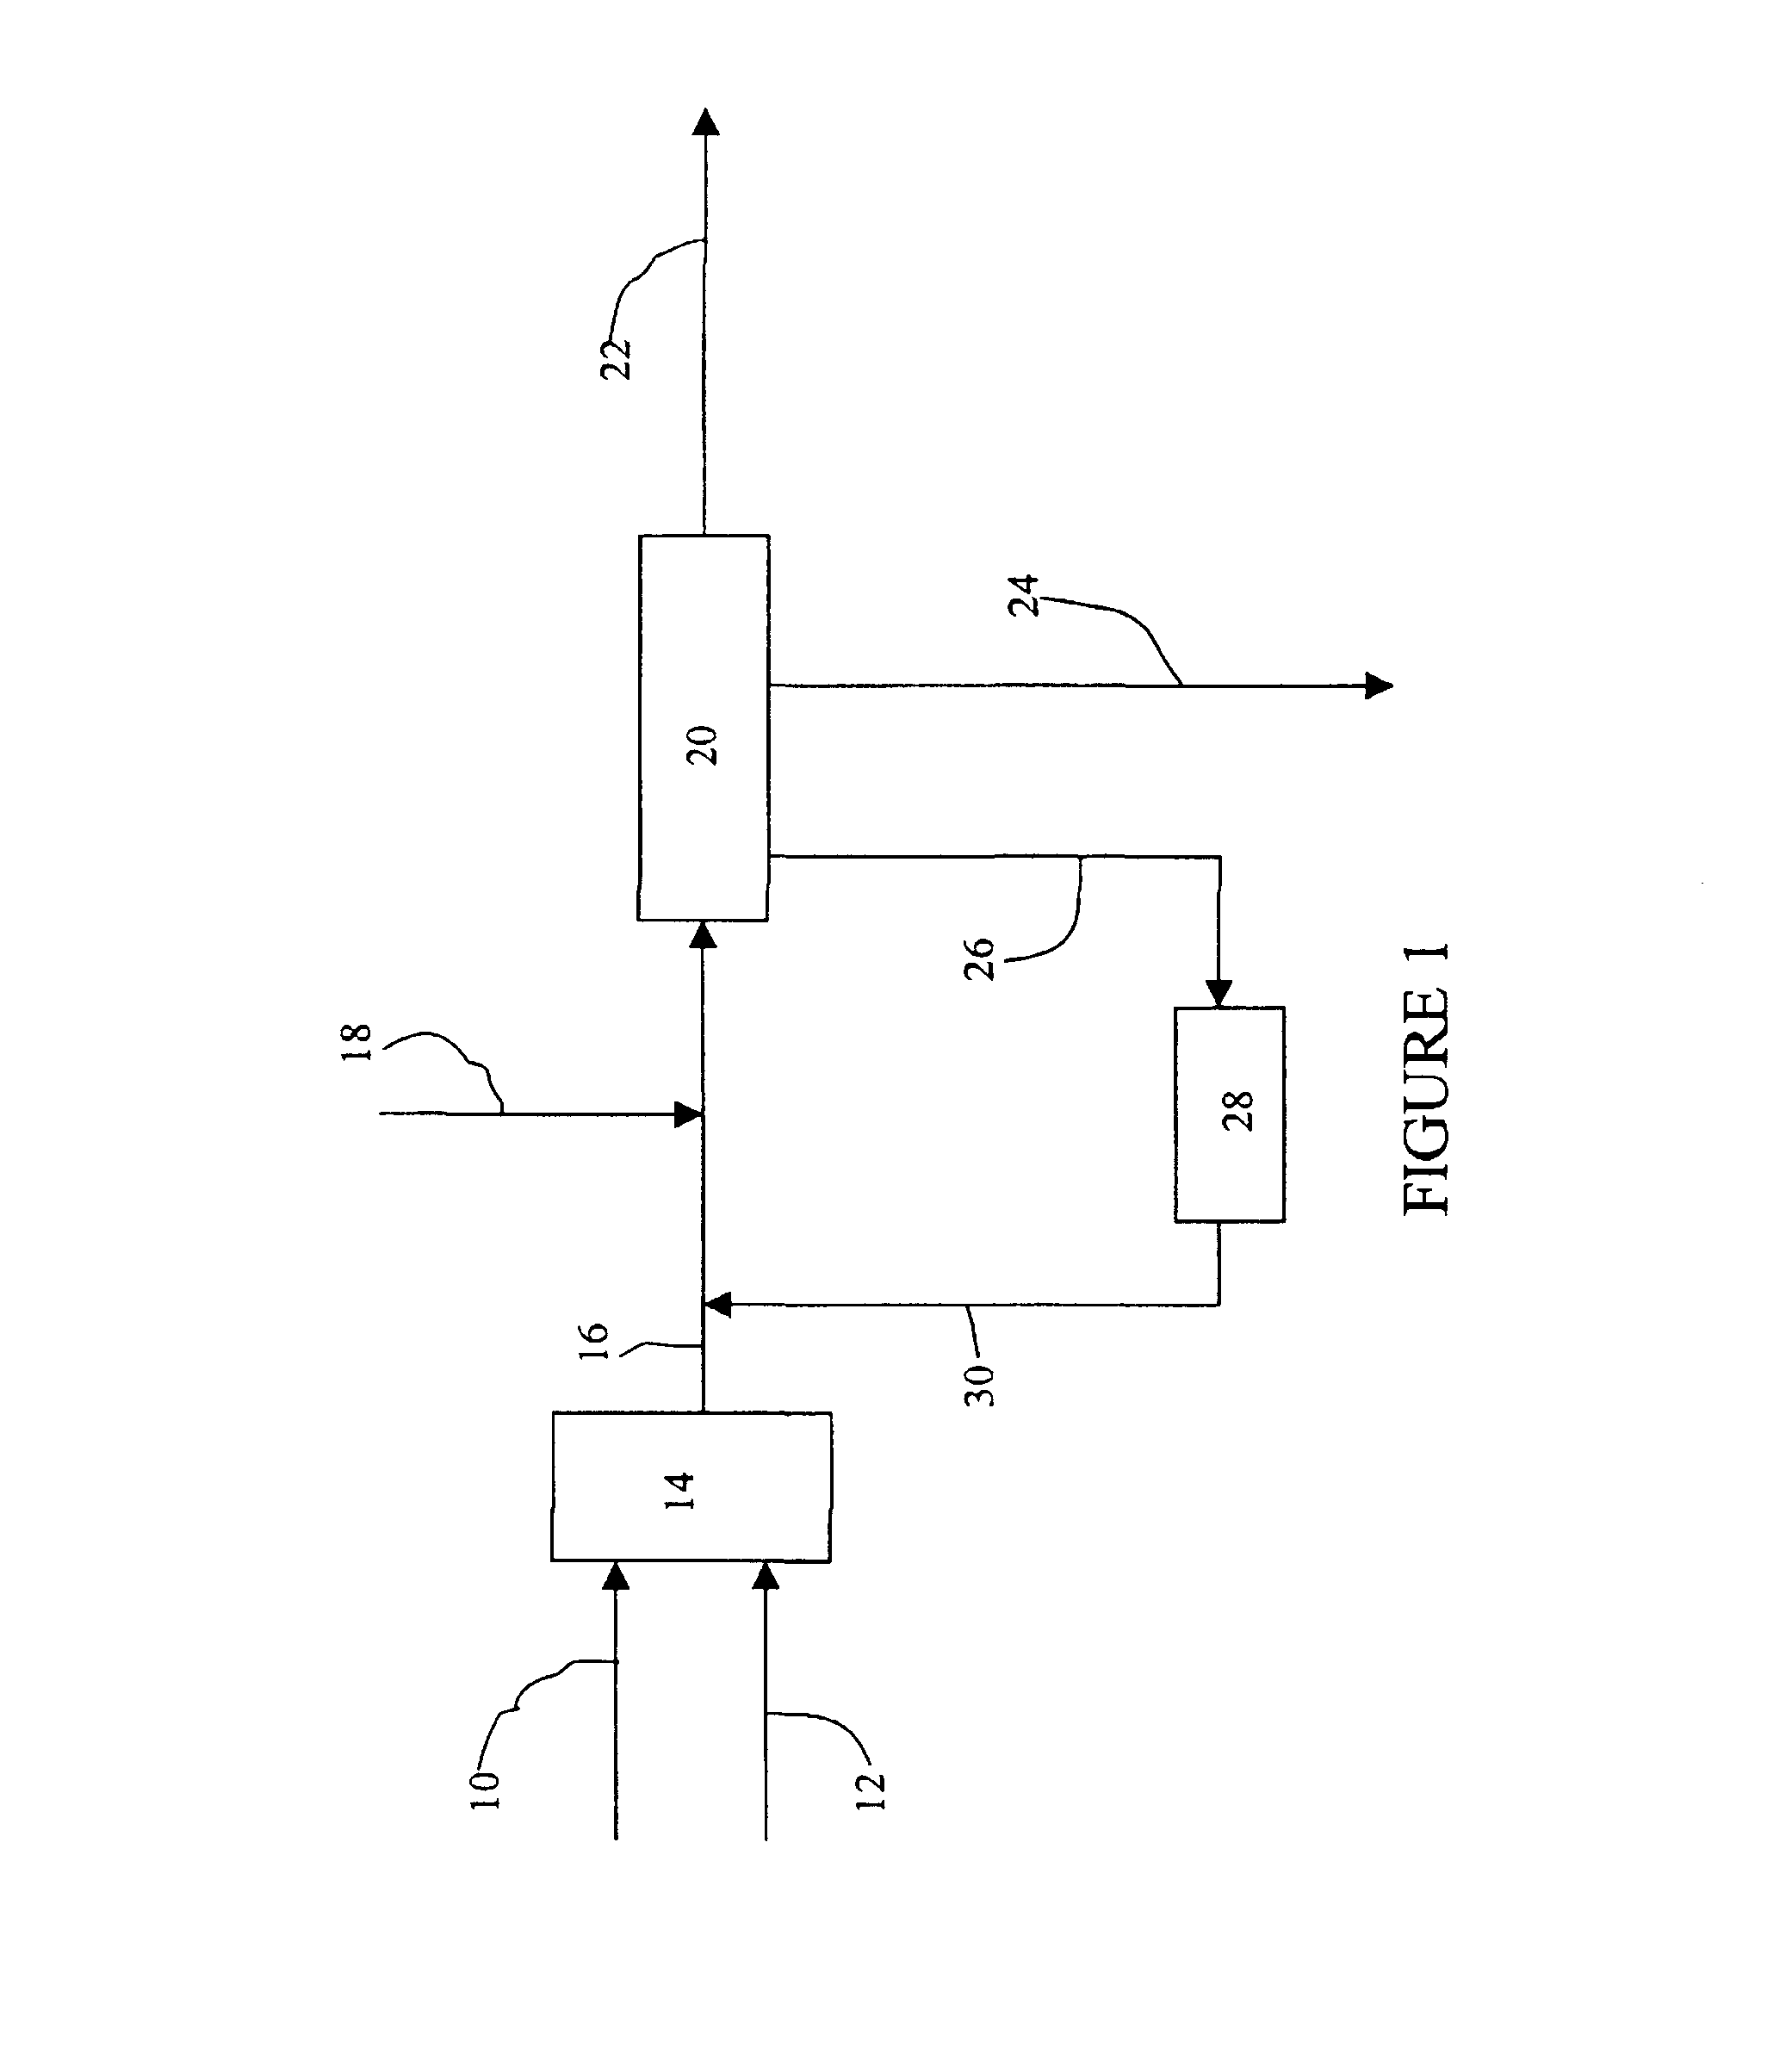 System and method for purifying cumene hydroperoxide cleavage products